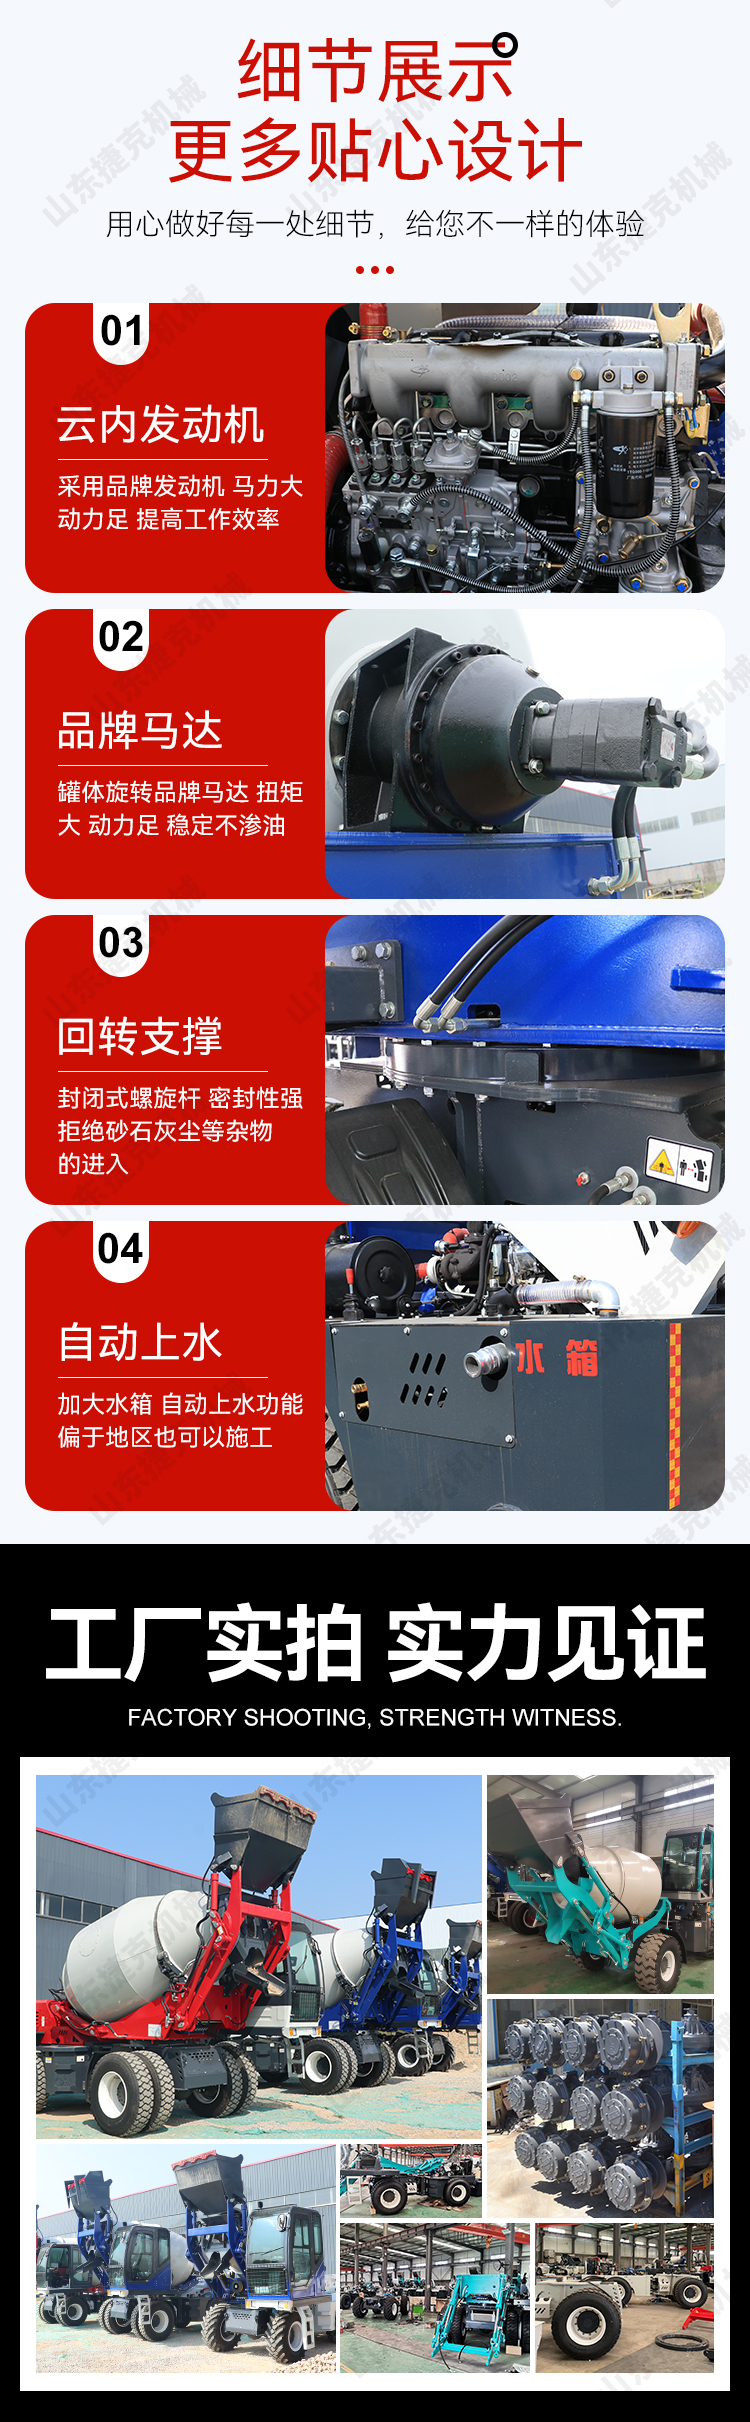 Self unloading and loading mixer truck, 2.4 square meter small concrete mixing tank truck, used for leveling rural self built houses